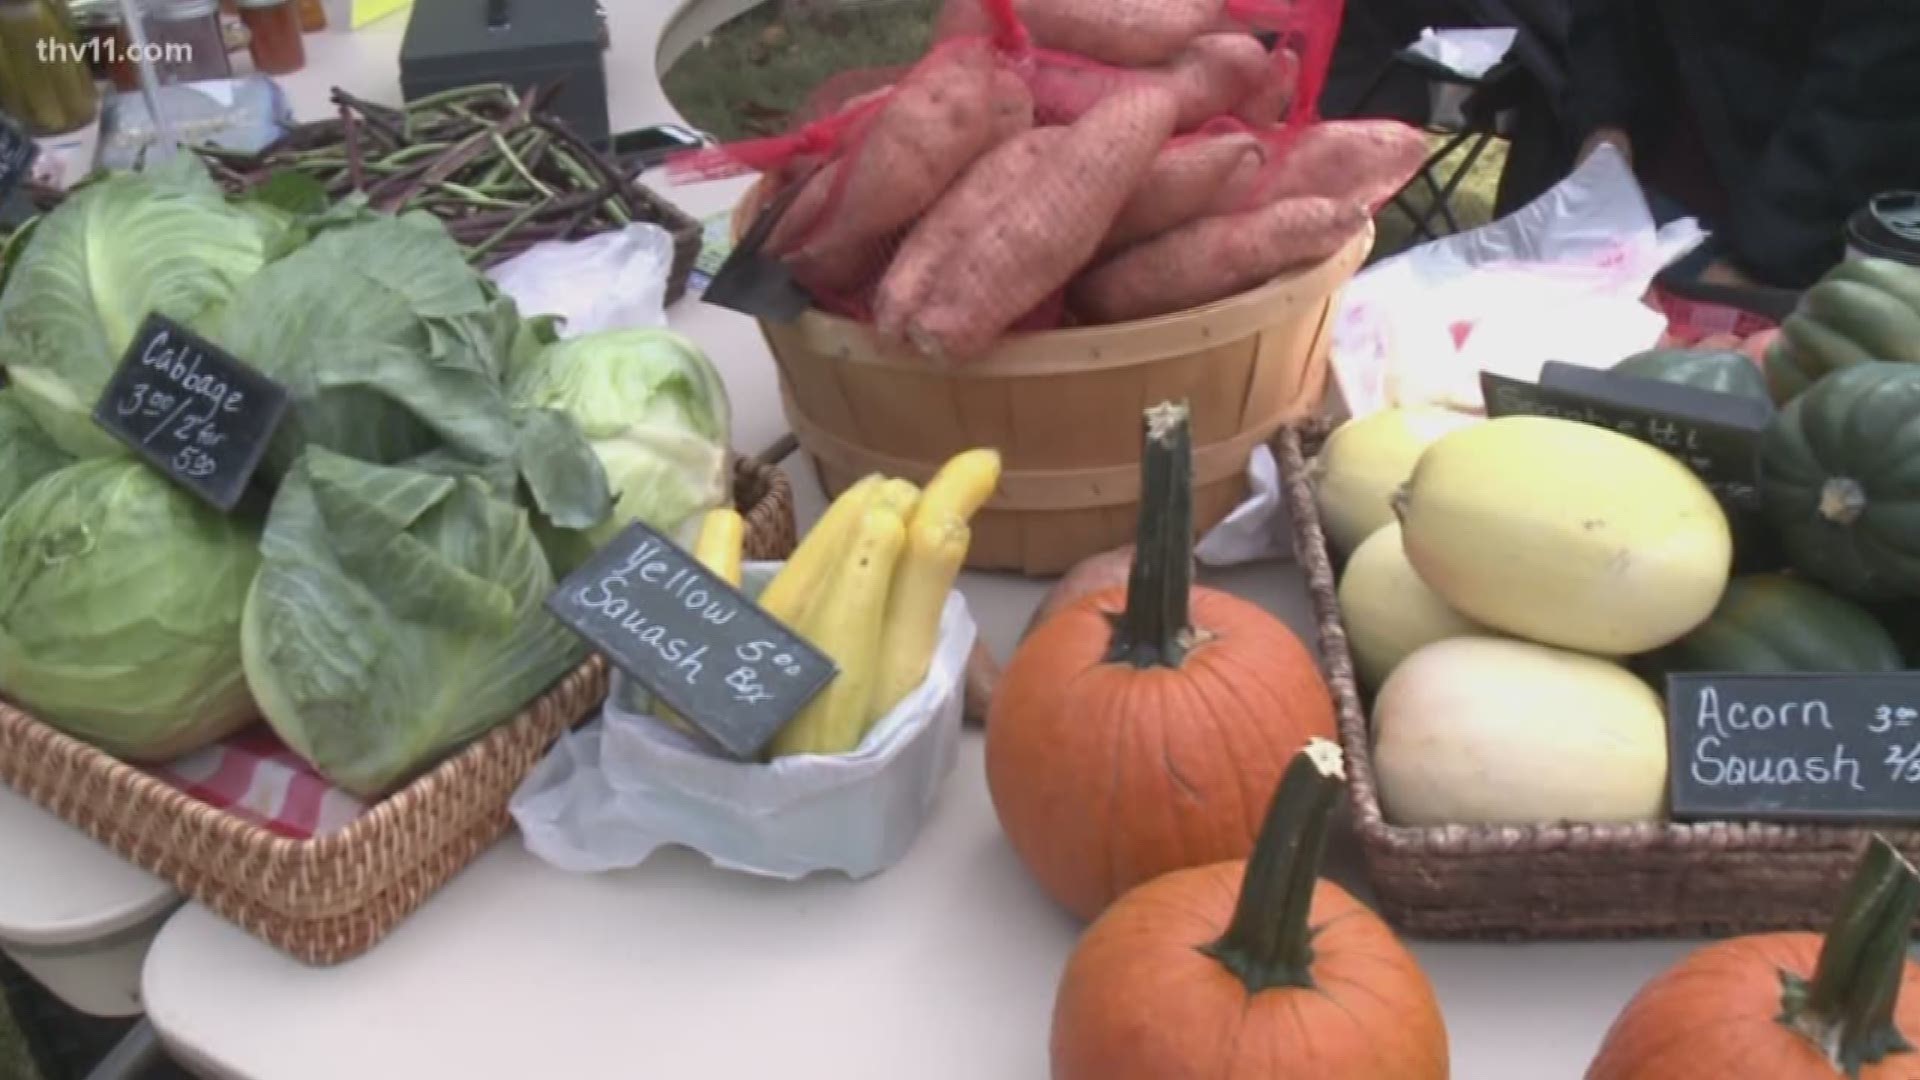 If you're looking to get your hands on some locally grown, fresh produce, Baptist Health is here to help.